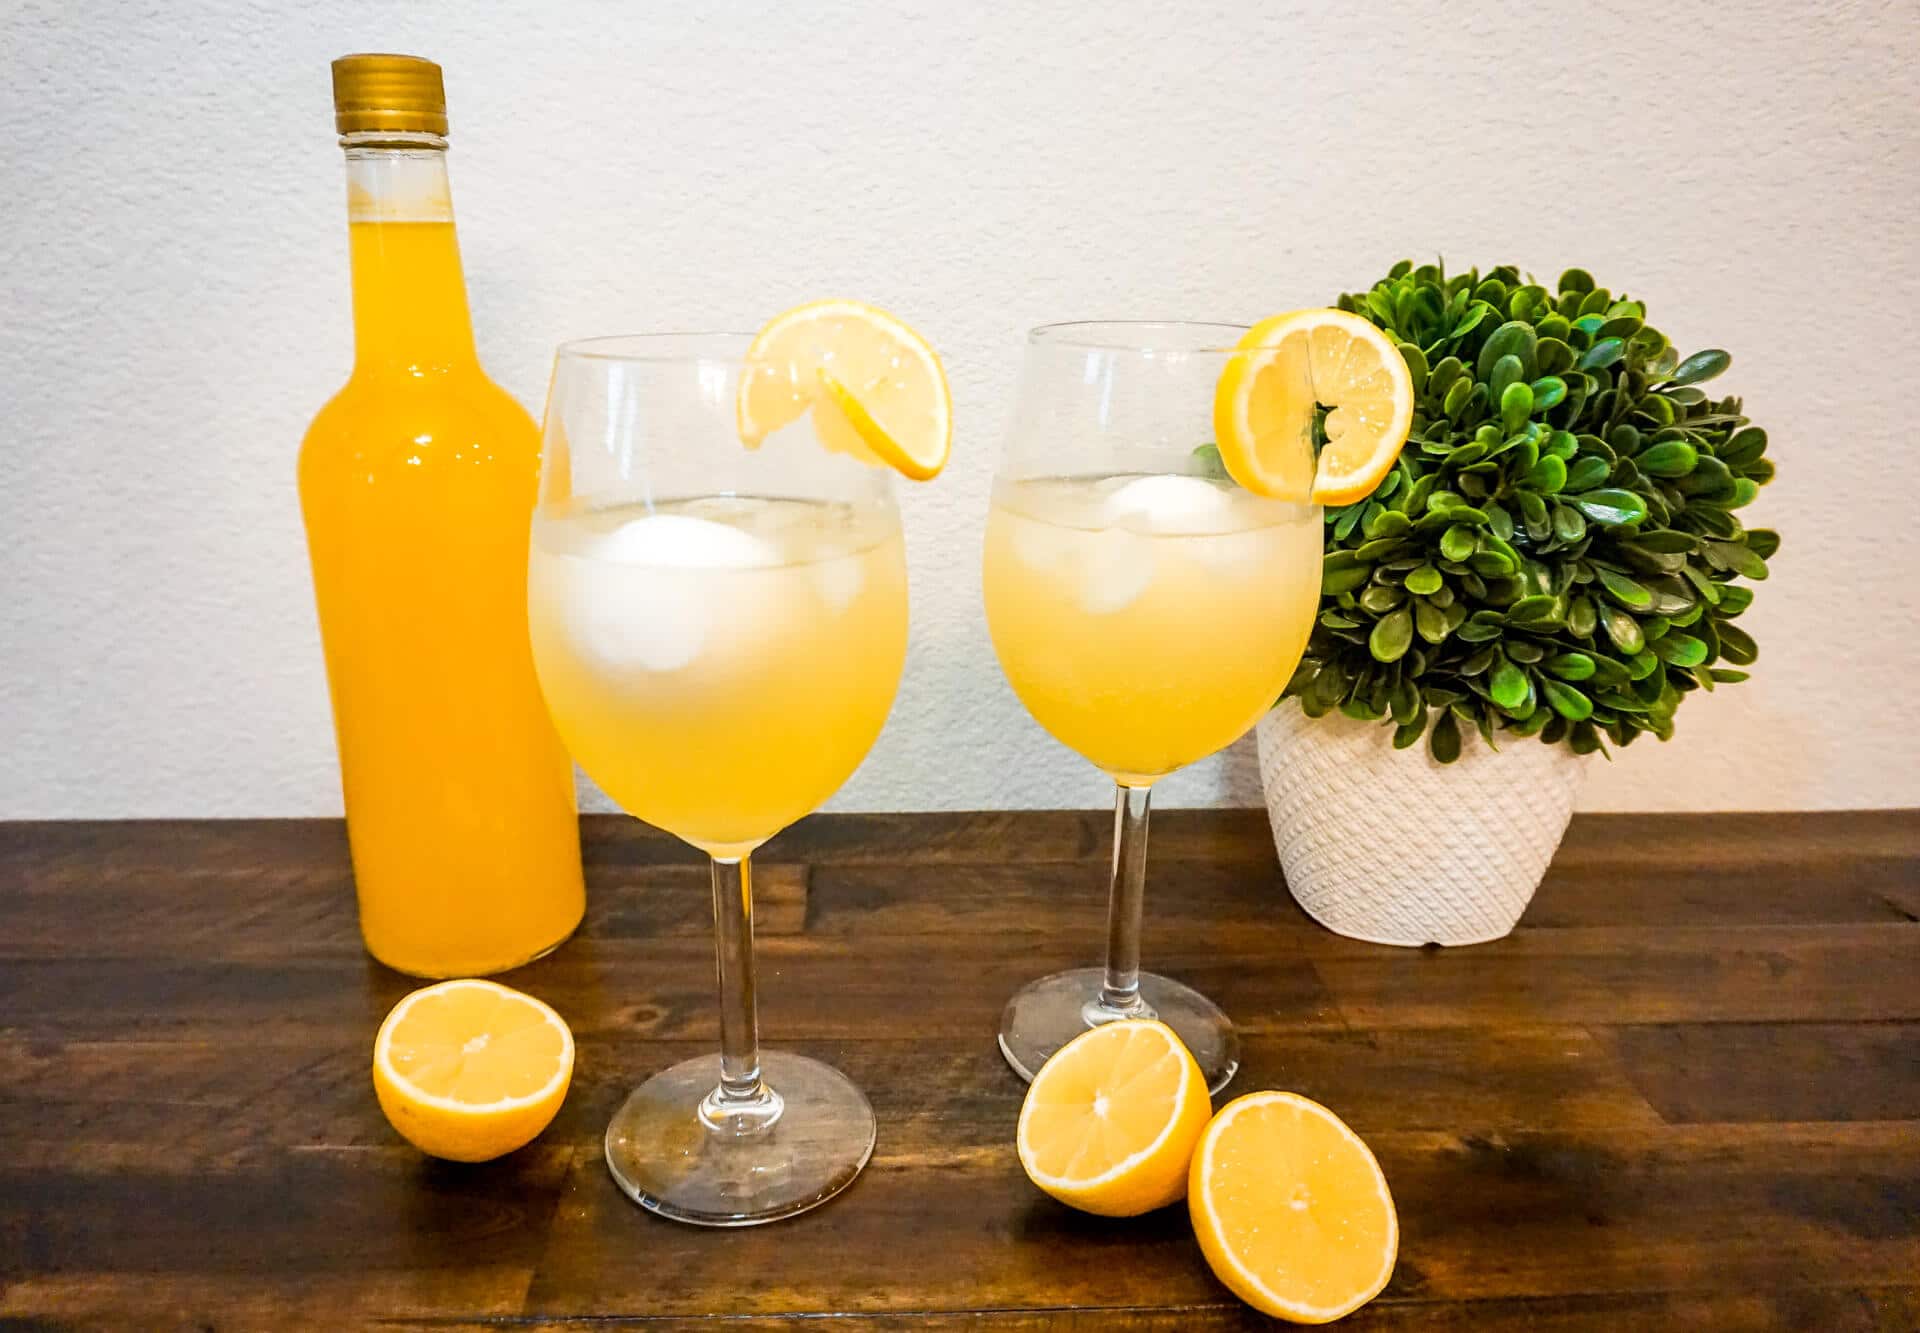 Limoncello Spritz – A Refreshing Cocktail from the Amalfi Coast